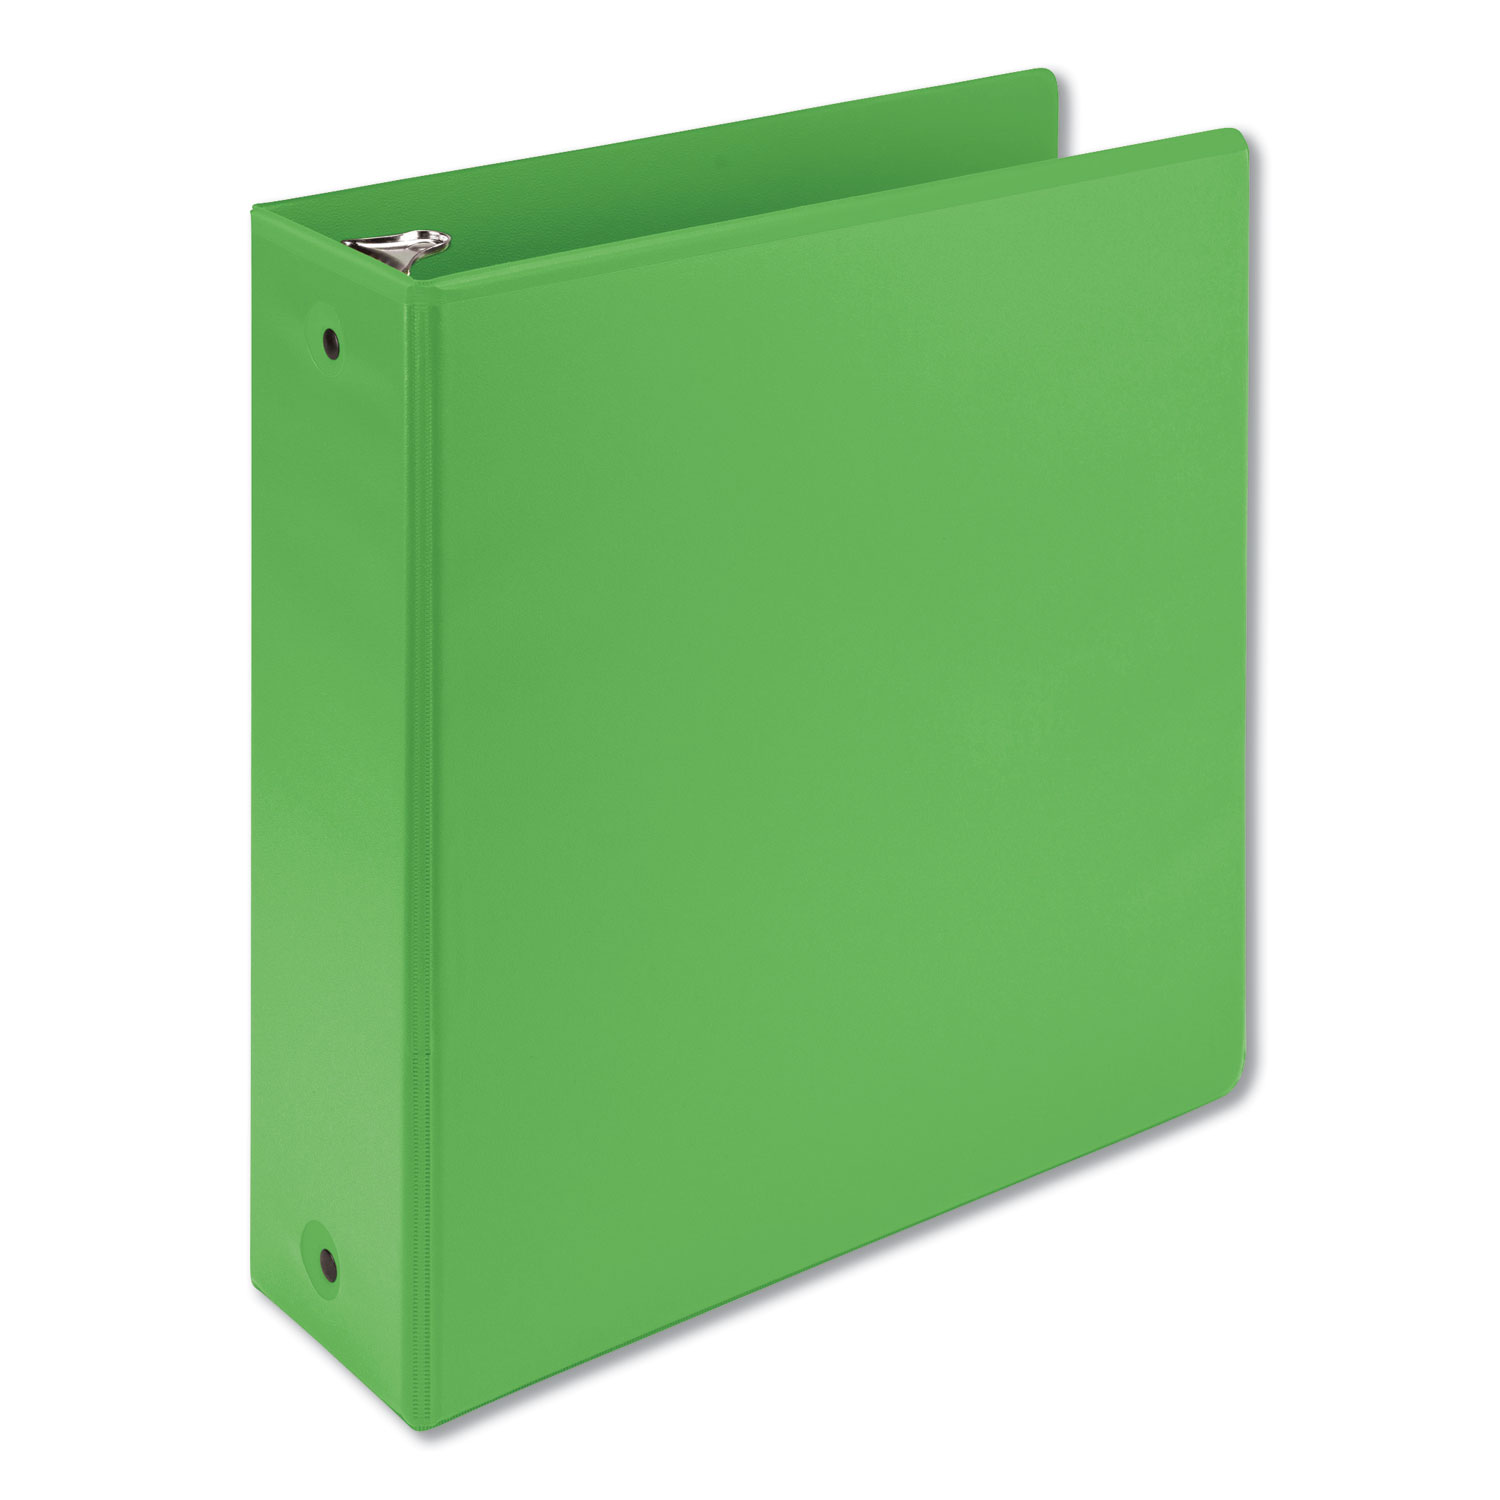  Samsill 17385 Earth's Choice Biobased Economy Round Ring View Binders, 3 Rings, 3 Capacity, 11 x 8.5, Lime (SAM17385) 